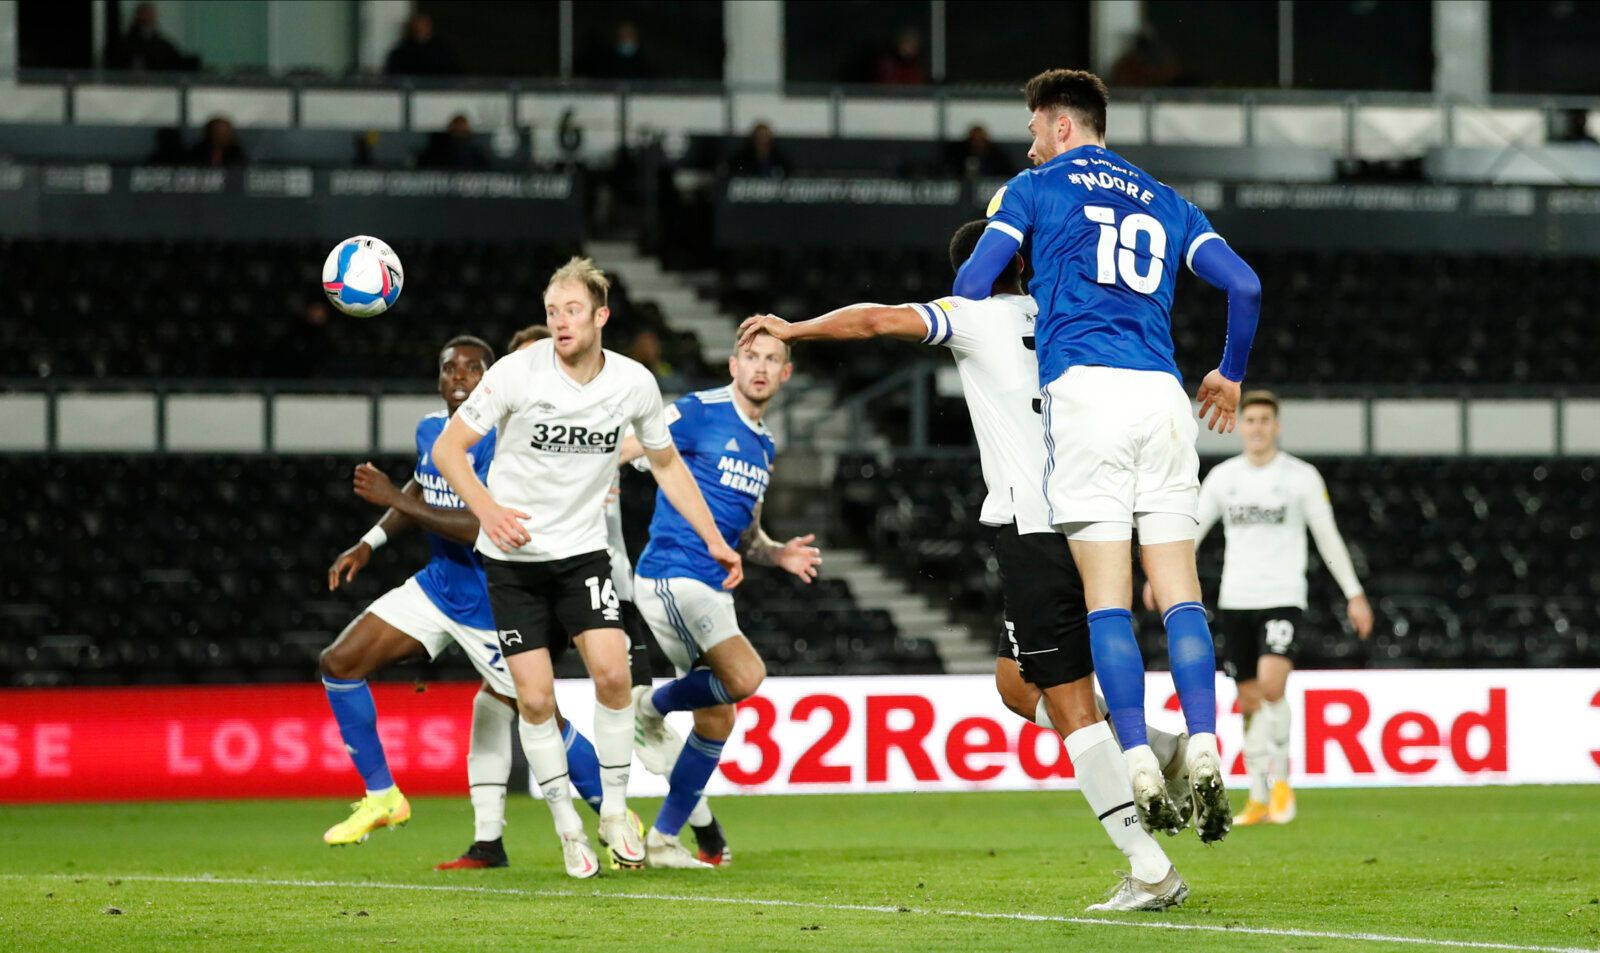 Soccer Football - Championship - Derby County v Cardiff City - Pride Park, Derby, Britain - October 28, 2020 Cardiff City's Kieffer Moore heads at goal Action Images/Andrew Boyers EDITORIAL USE ONLY. No use with unauthorized audio, video, data, fixture lists, club/league logos or 'live' services. Online in-match use limited to 75 images, no video emulation. No use in betting, games or single club /league/player publications.  Please contact your account representative for further details.